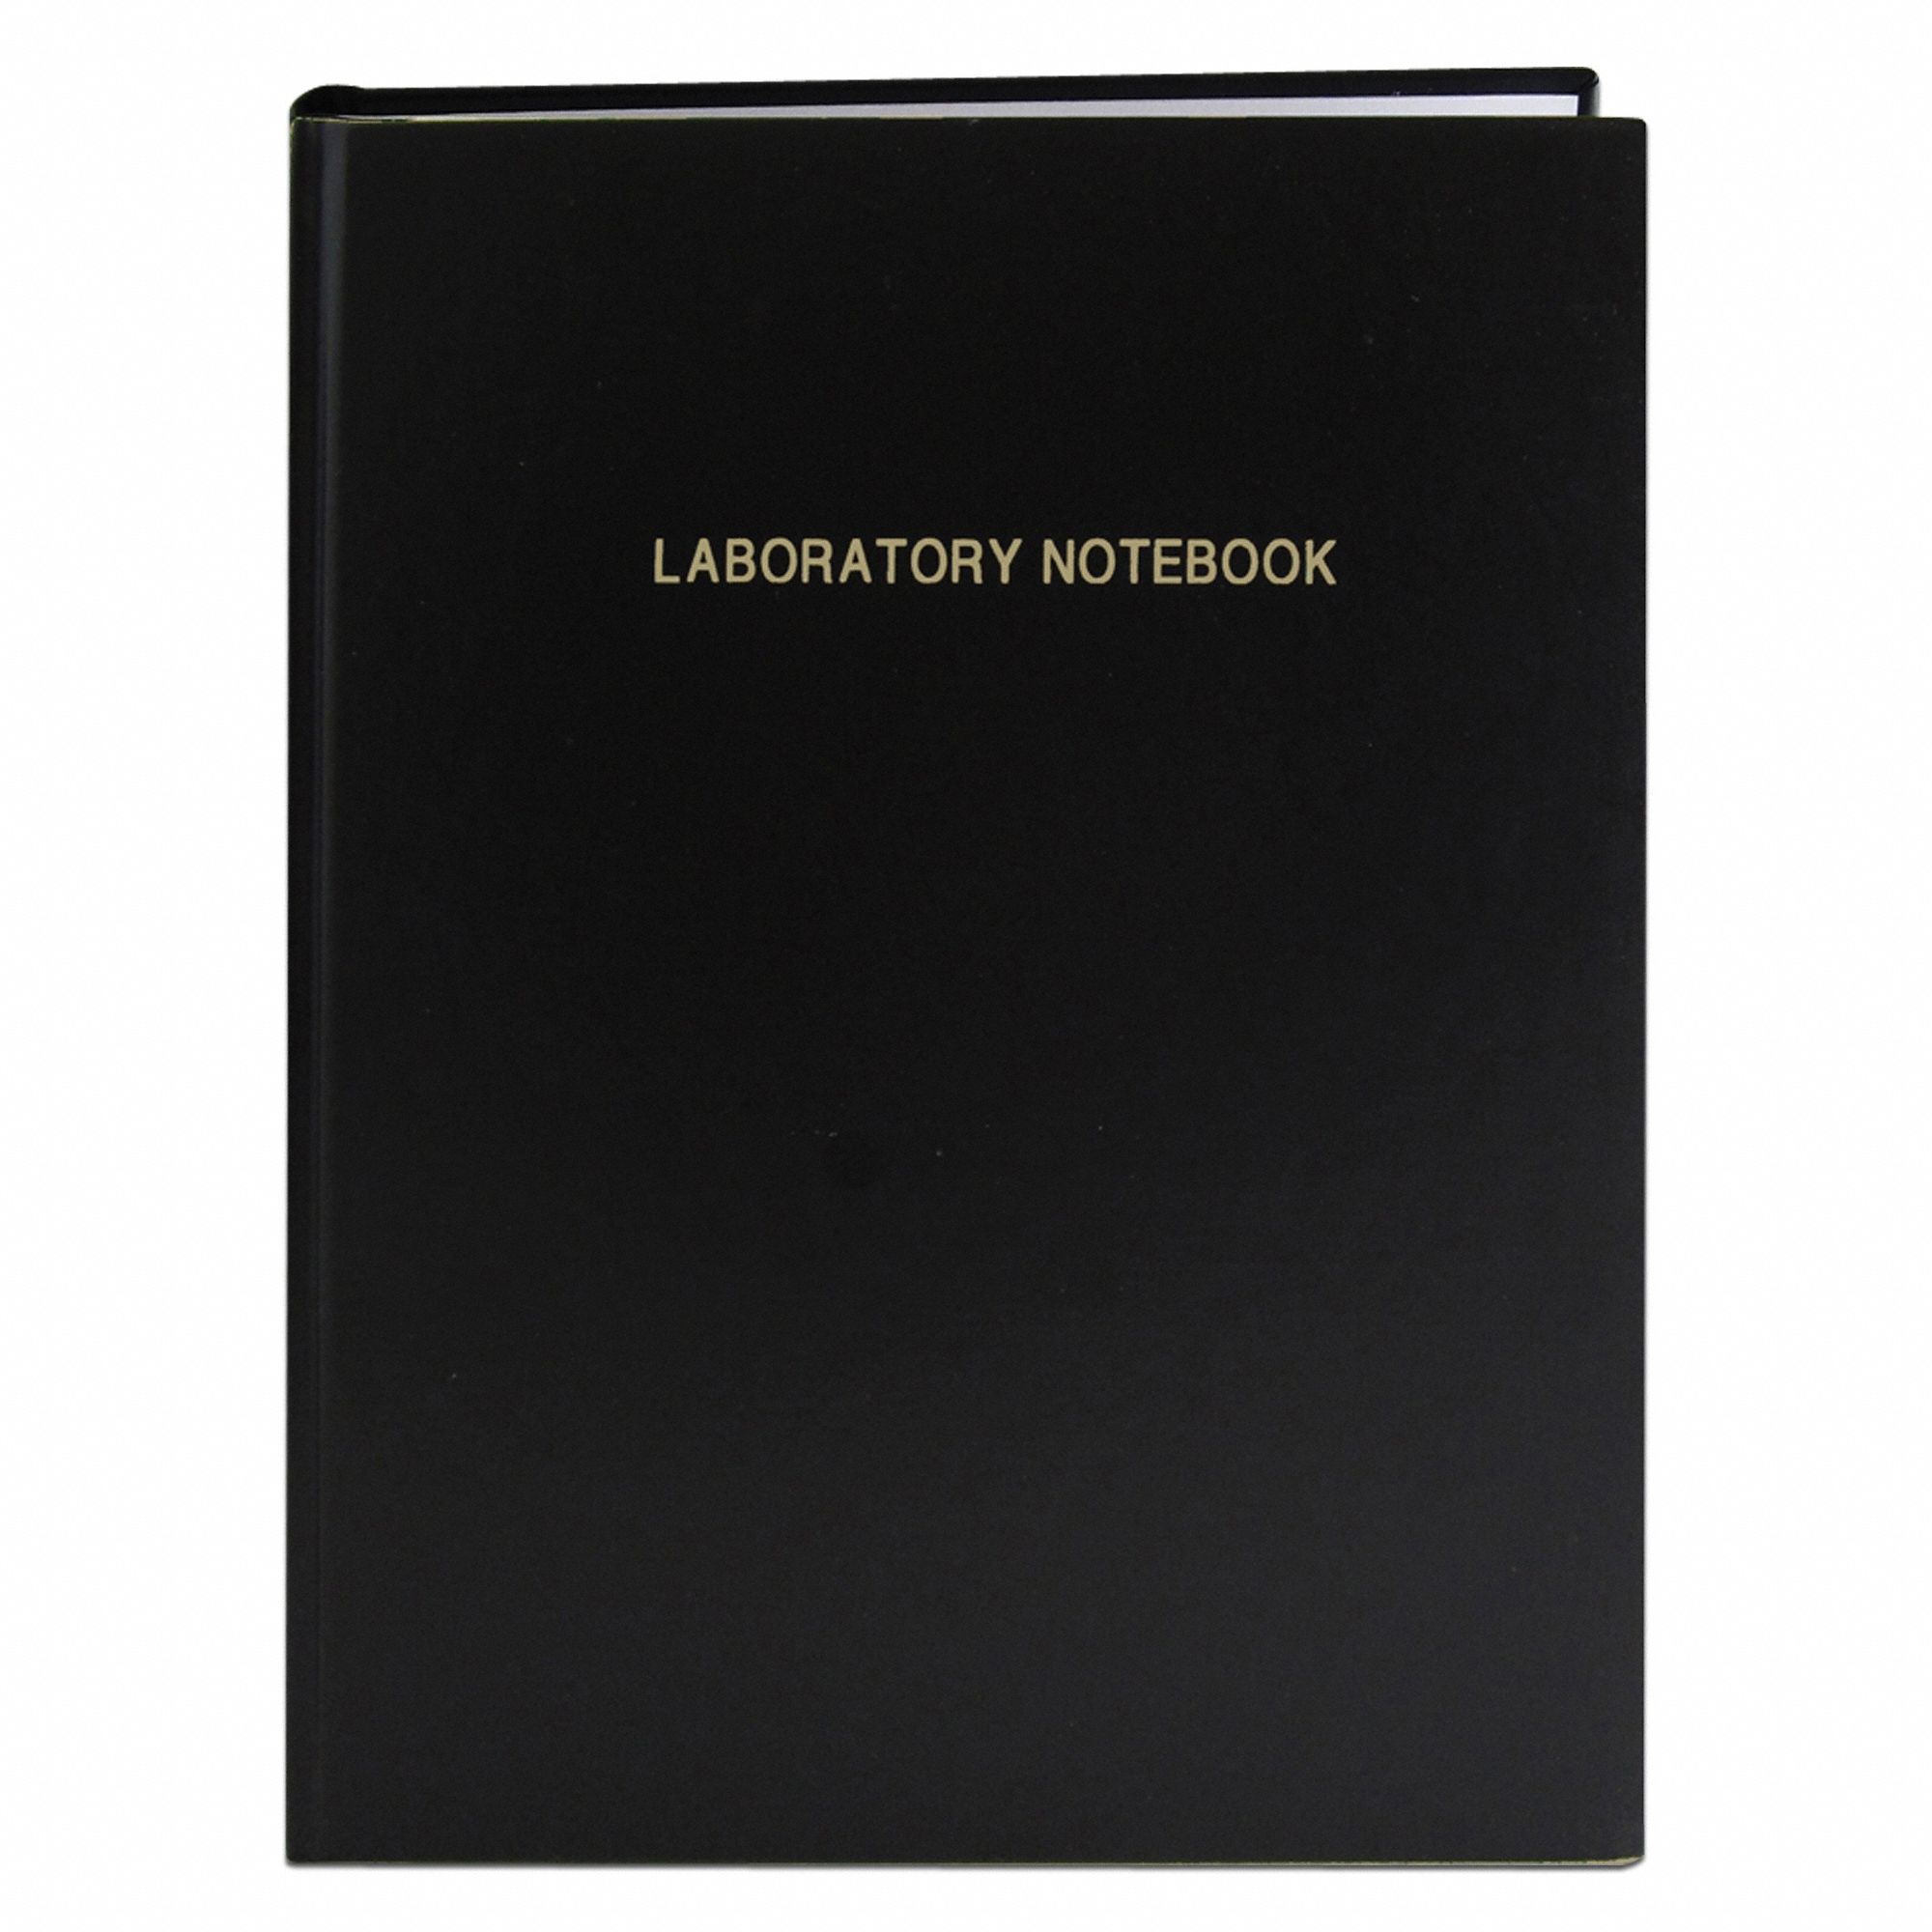 Notebook: Quadrille, Nonwirebound, 72 Sheets, Pages Numbered, 0 Carbon Sheets, Left